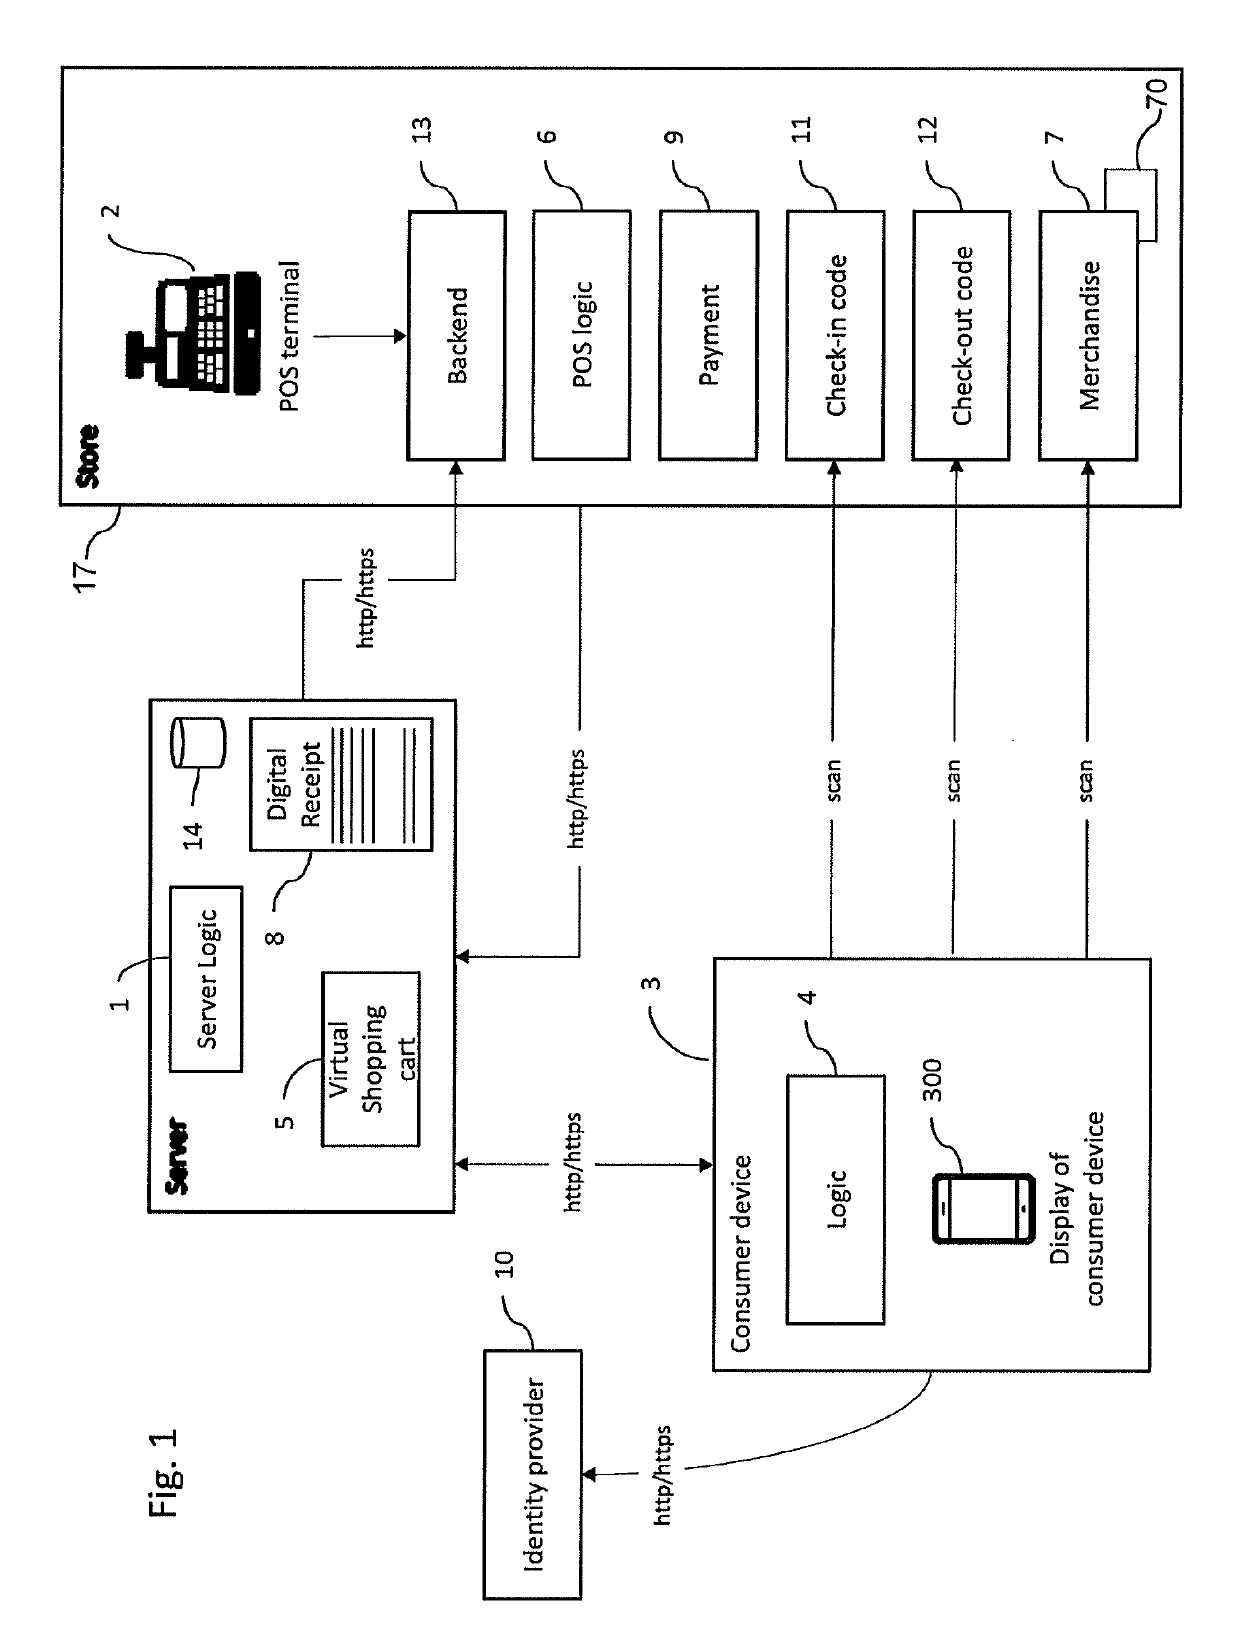 Payment system and method including enabling electronic receipts